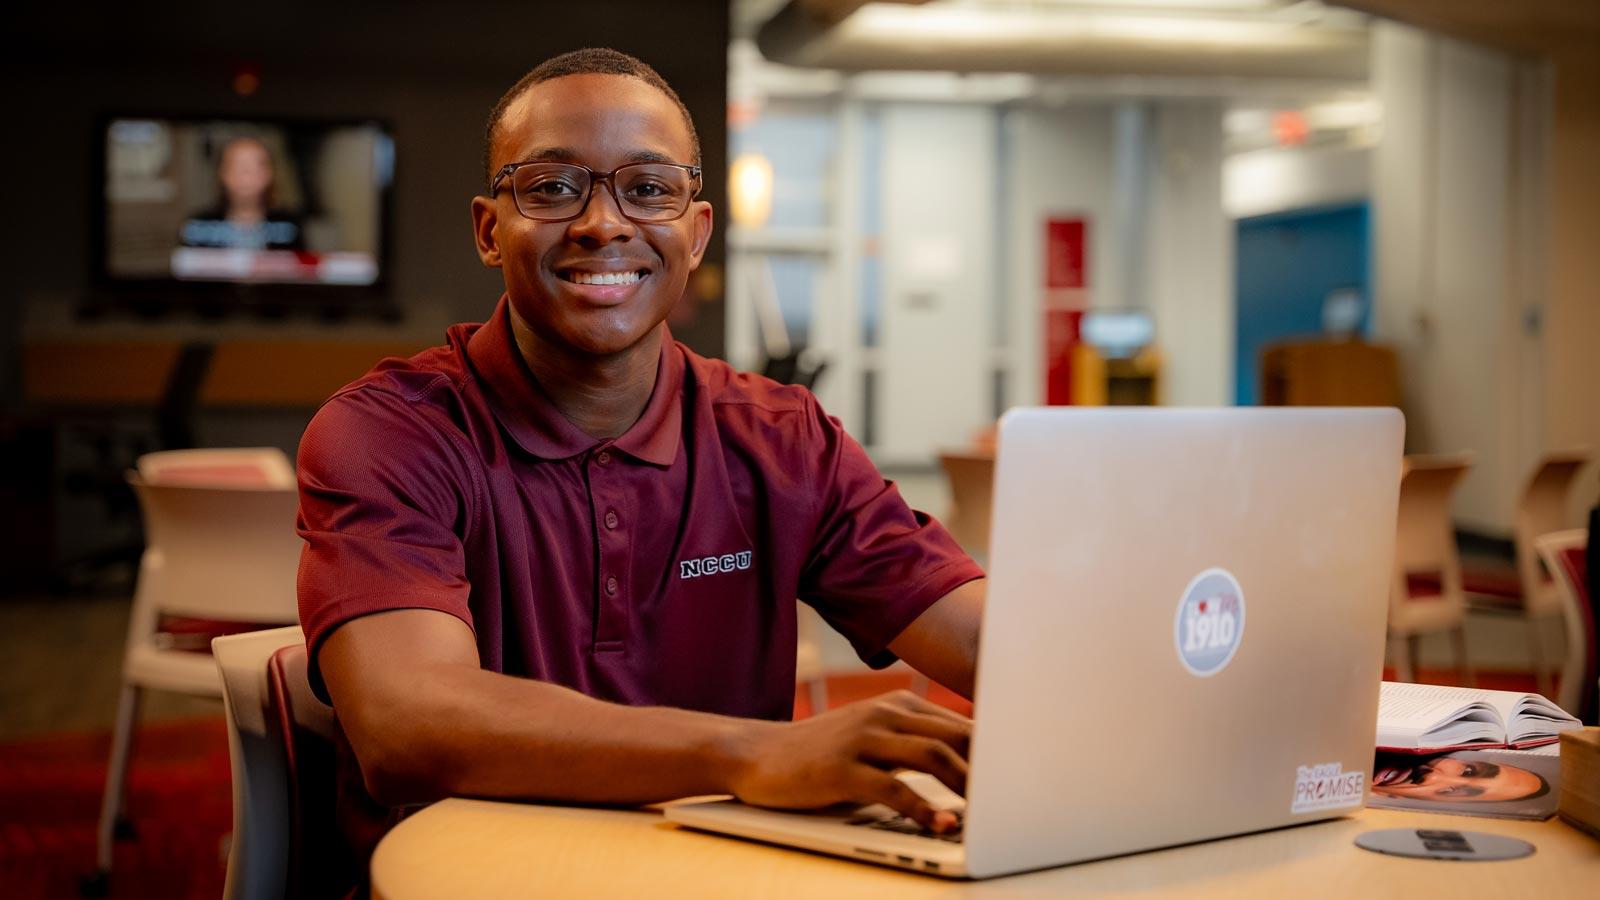 nccu student typing on a laptop, smiling